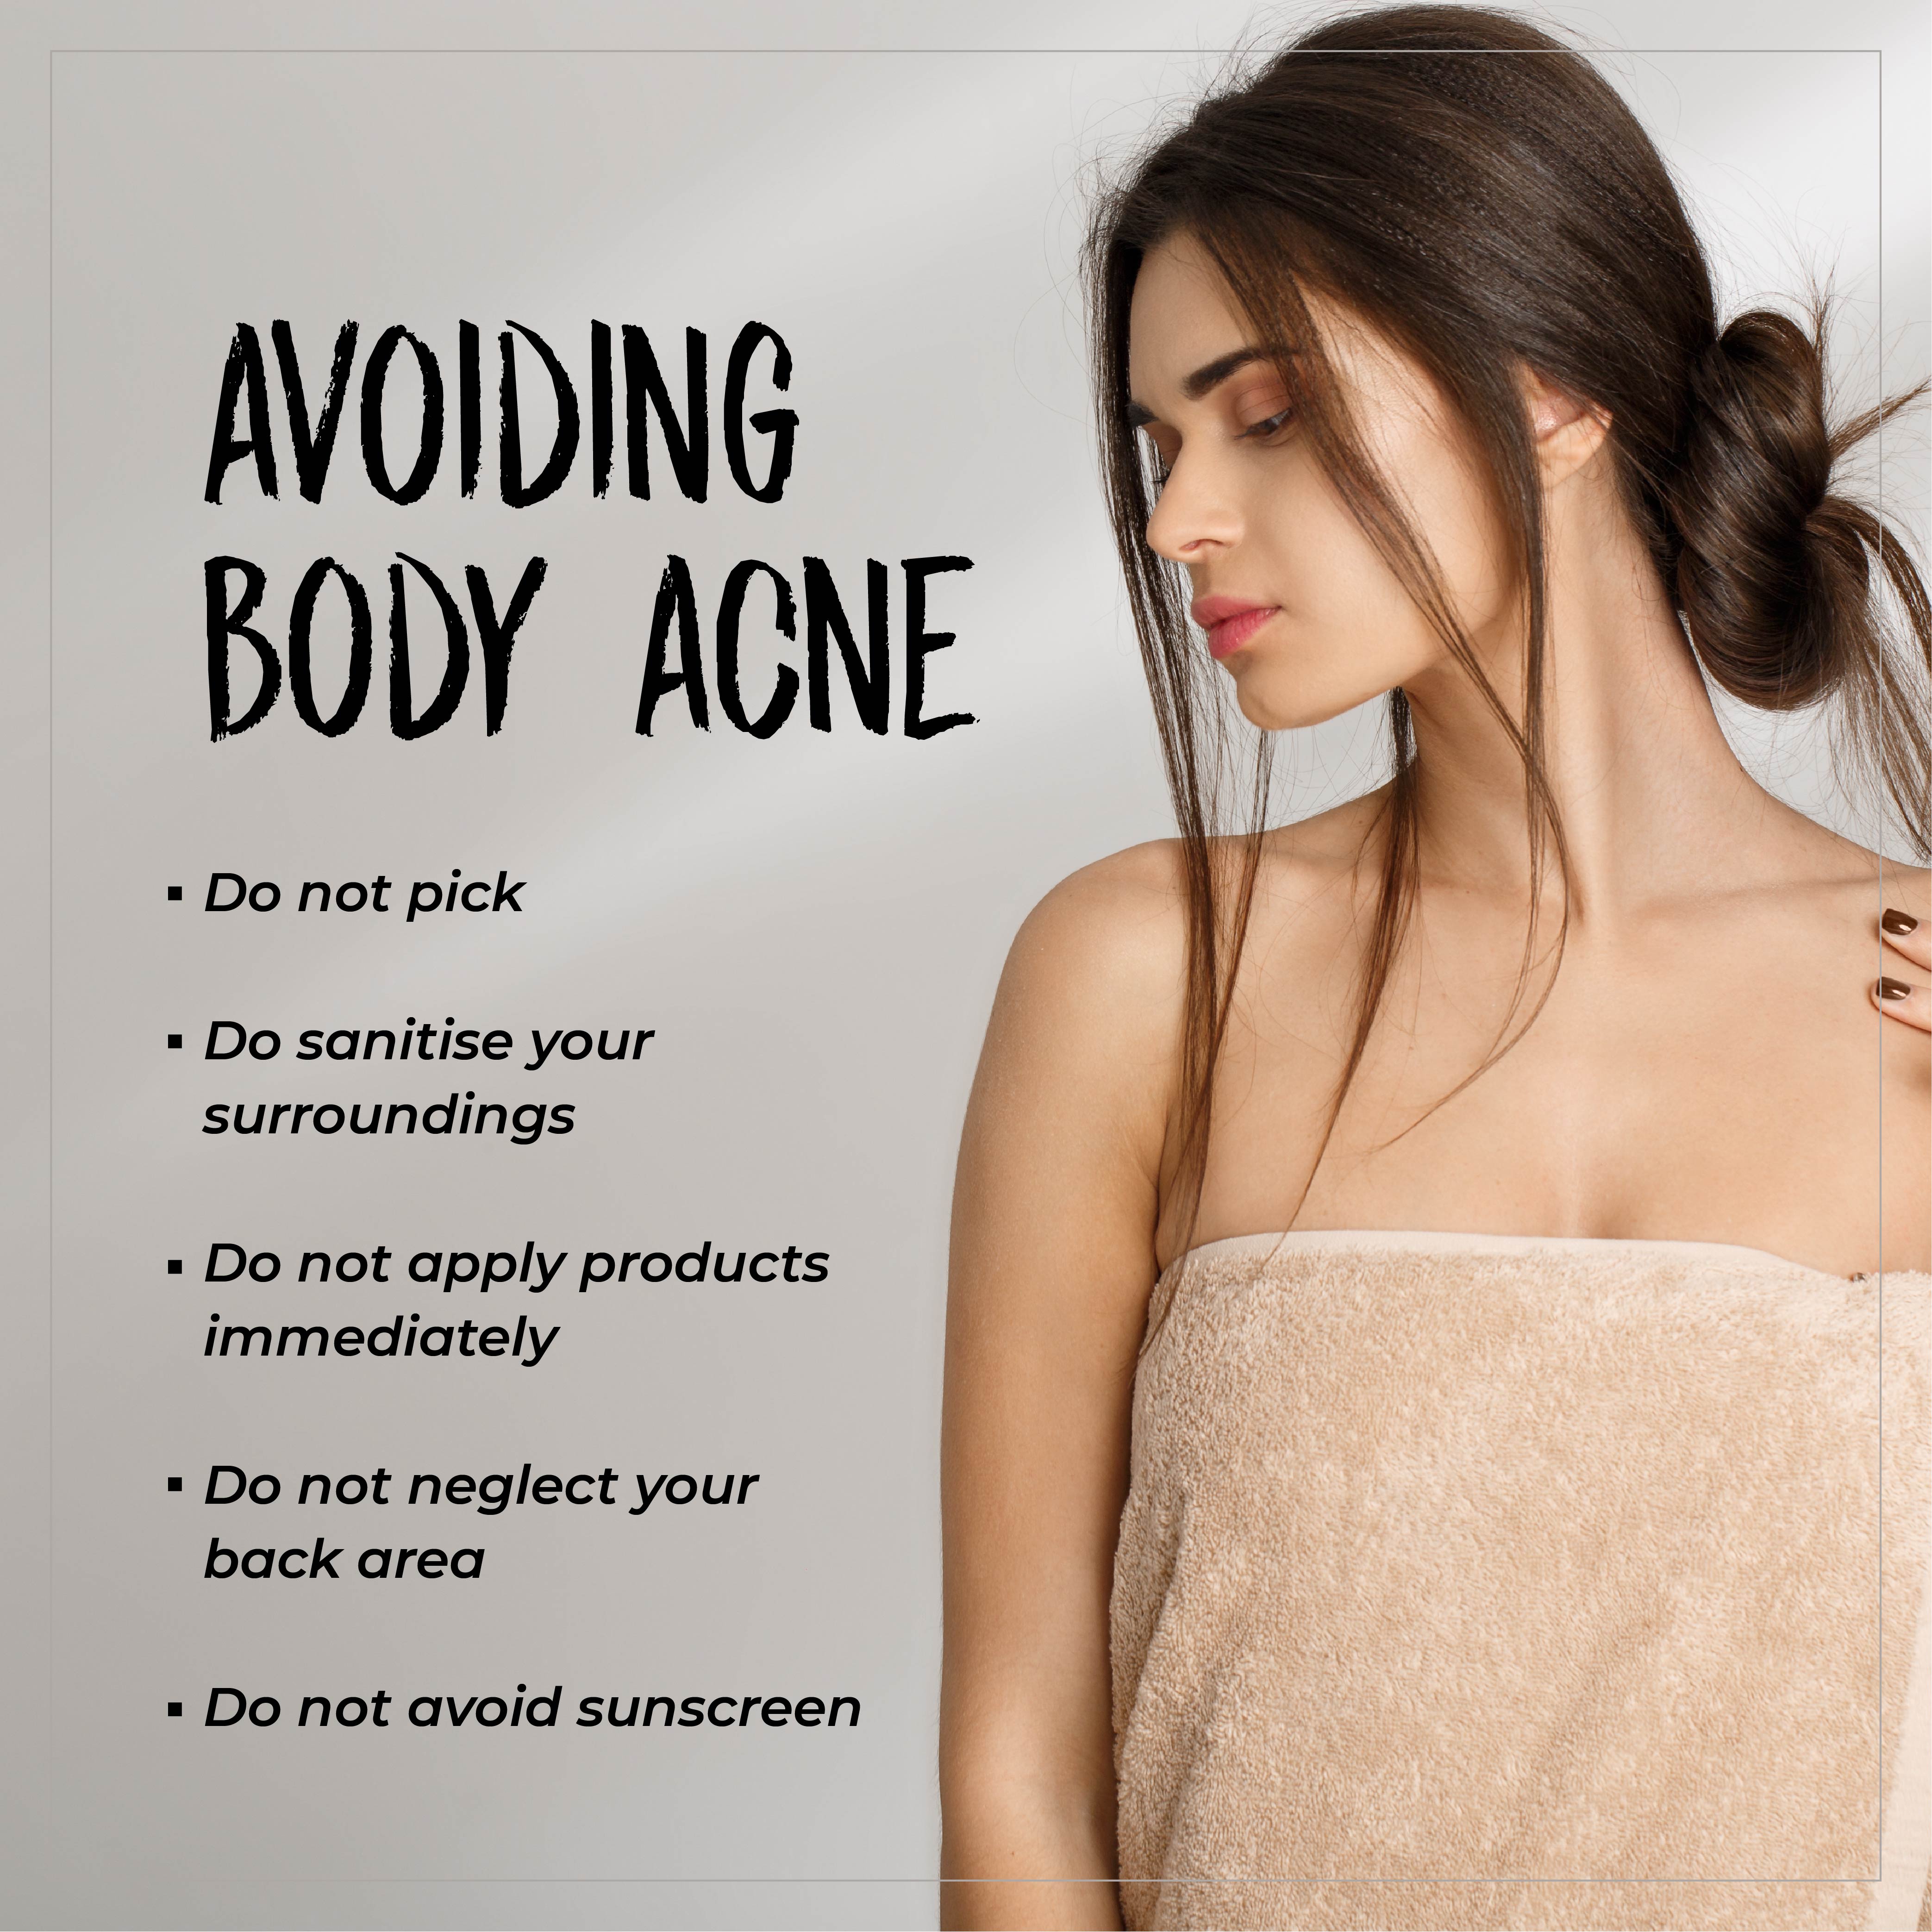 This is an image of how to avoid body acne